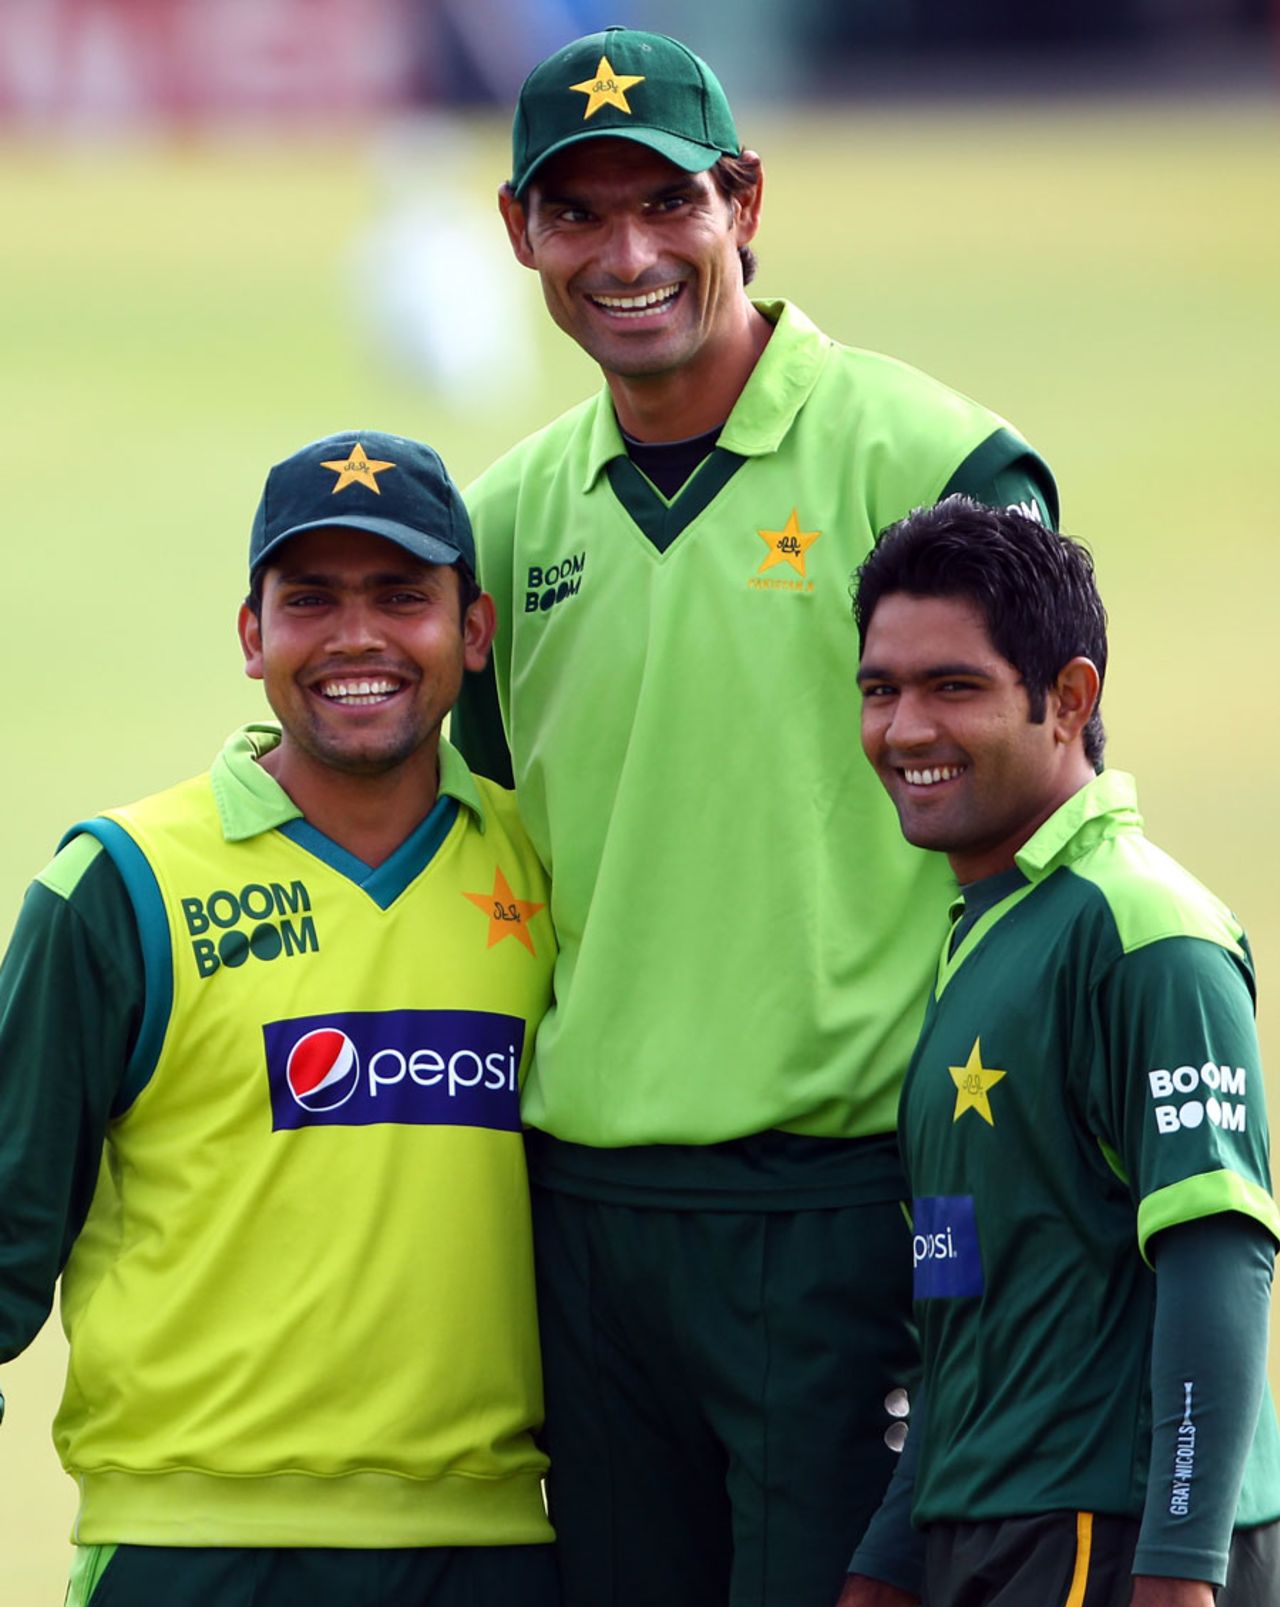 Mohammad Irfan poses with Kamran Akmal and Asad Shafiq during Pakistan's training session, September 9 2010 